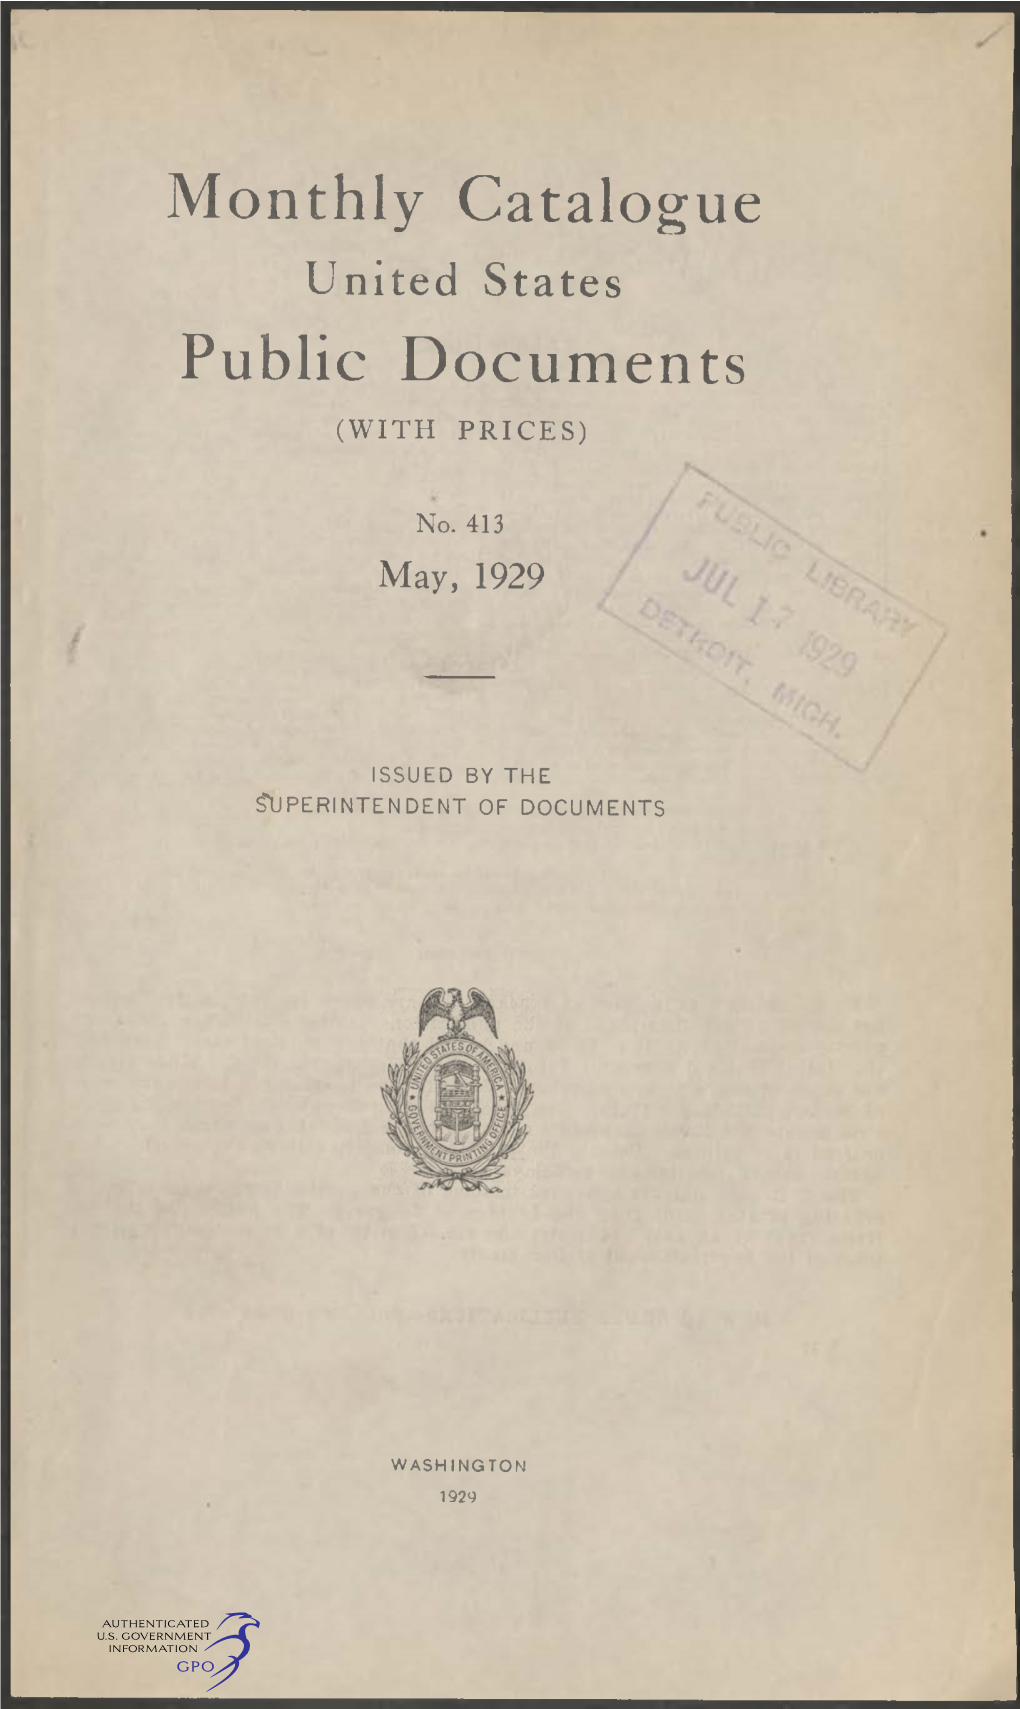 Monthly Catalogue, United States Public Documents May 1929